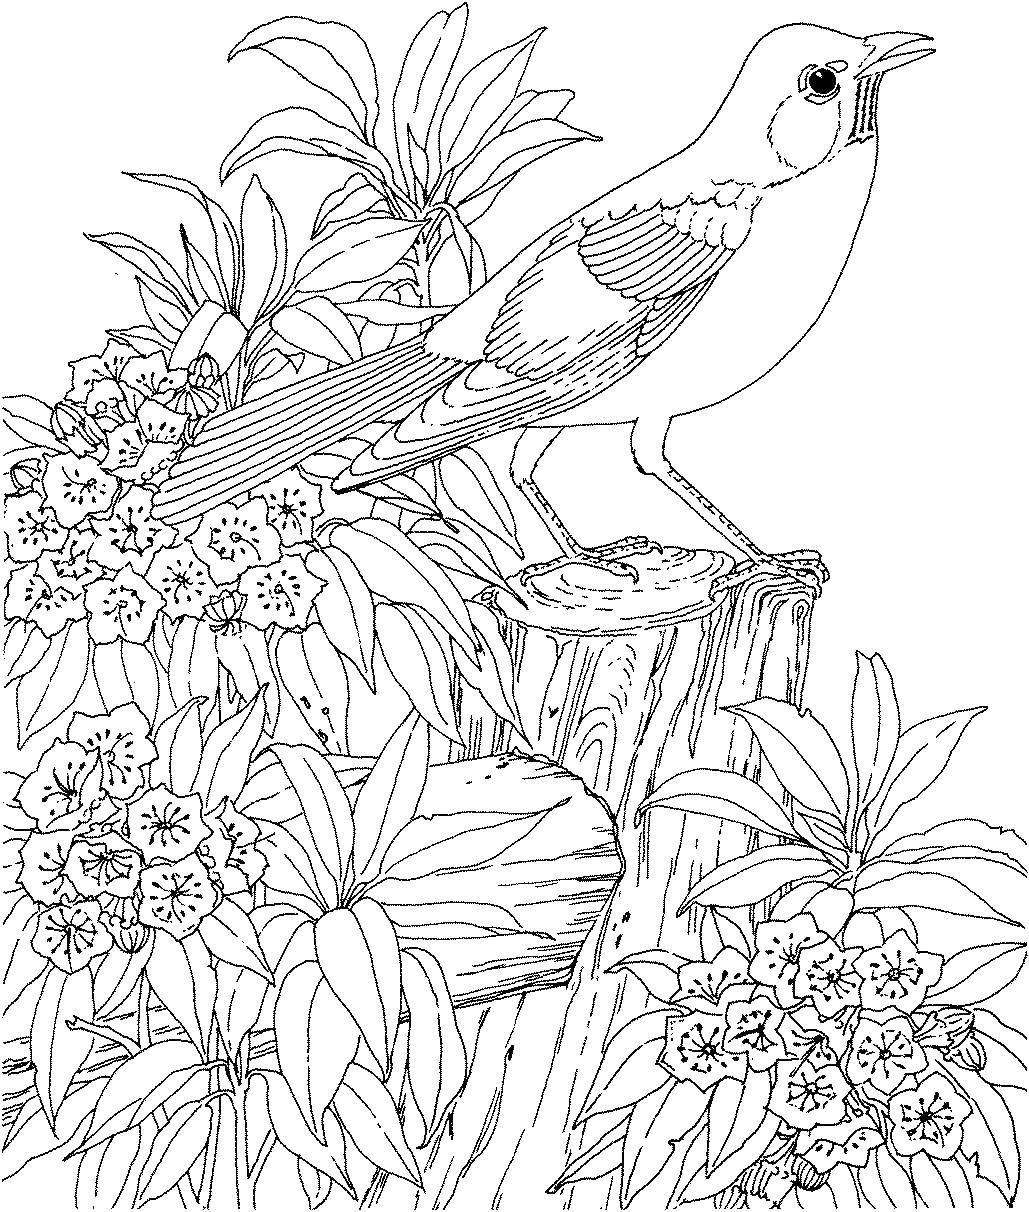 Coloring Bird and flowers. Category nature. Tags:  nature, flowers, bird.